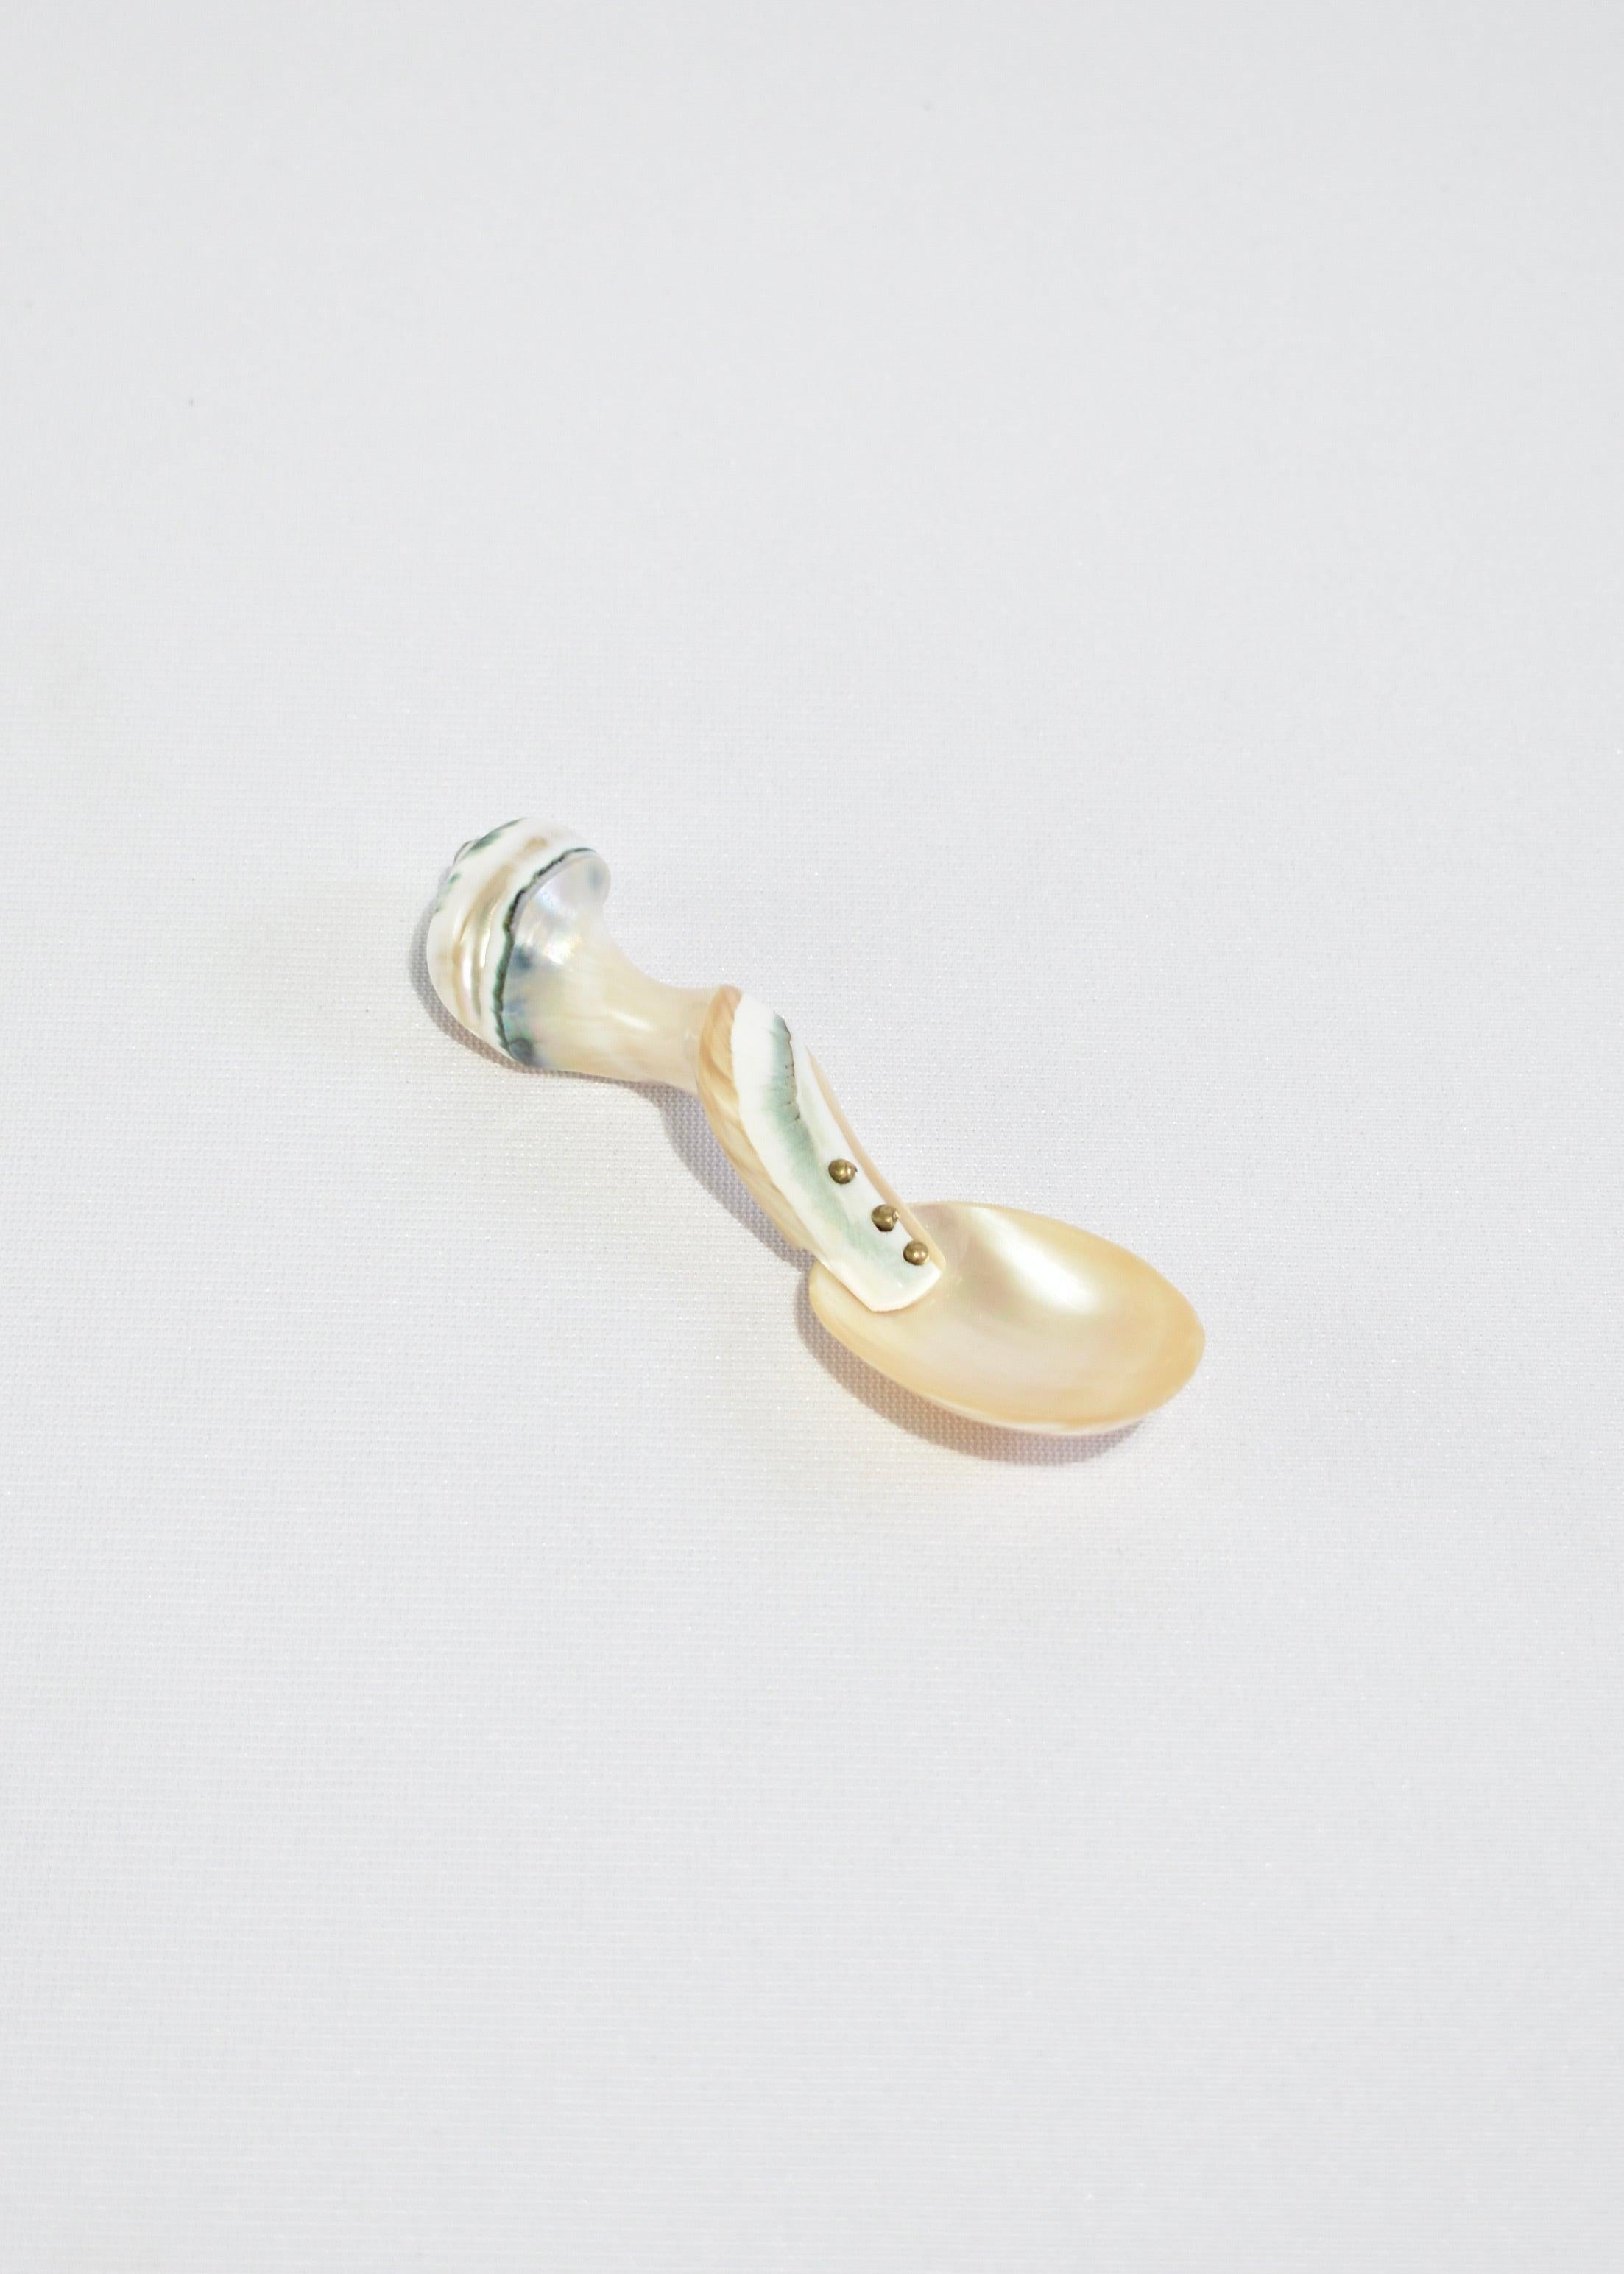 Vintage, petite carved and polished mother of pearl shell spoon.